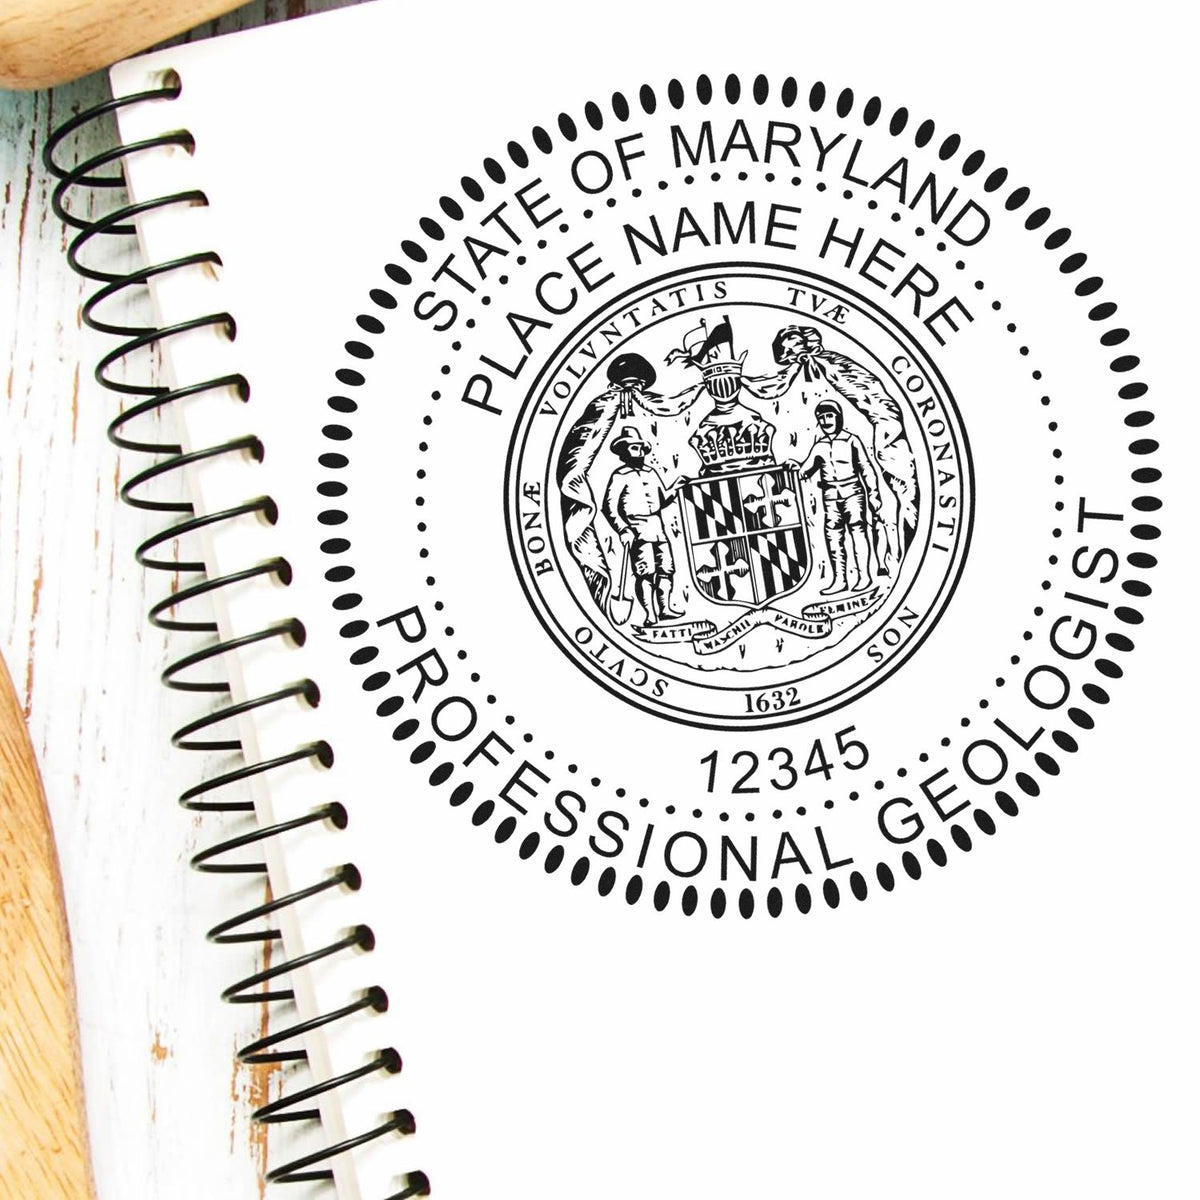 A photograph of the Maryland Professional Geologist Seal Stamp stamp impression reveals a vivid, professional image of the on paper.